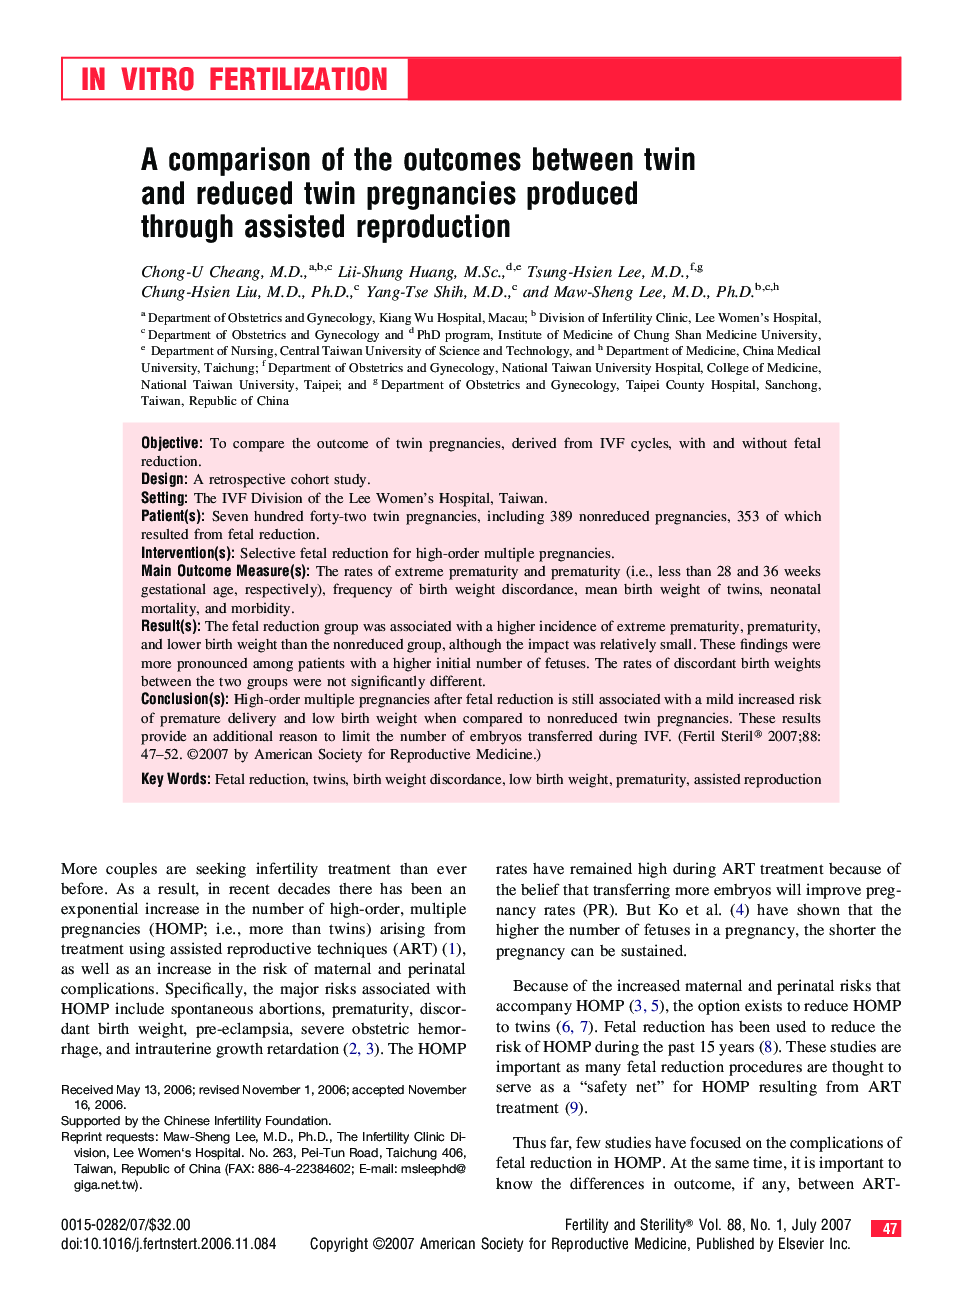 A comparison of the outcomes between twin and reduced twin pregnancies produced through assisted reproduction 